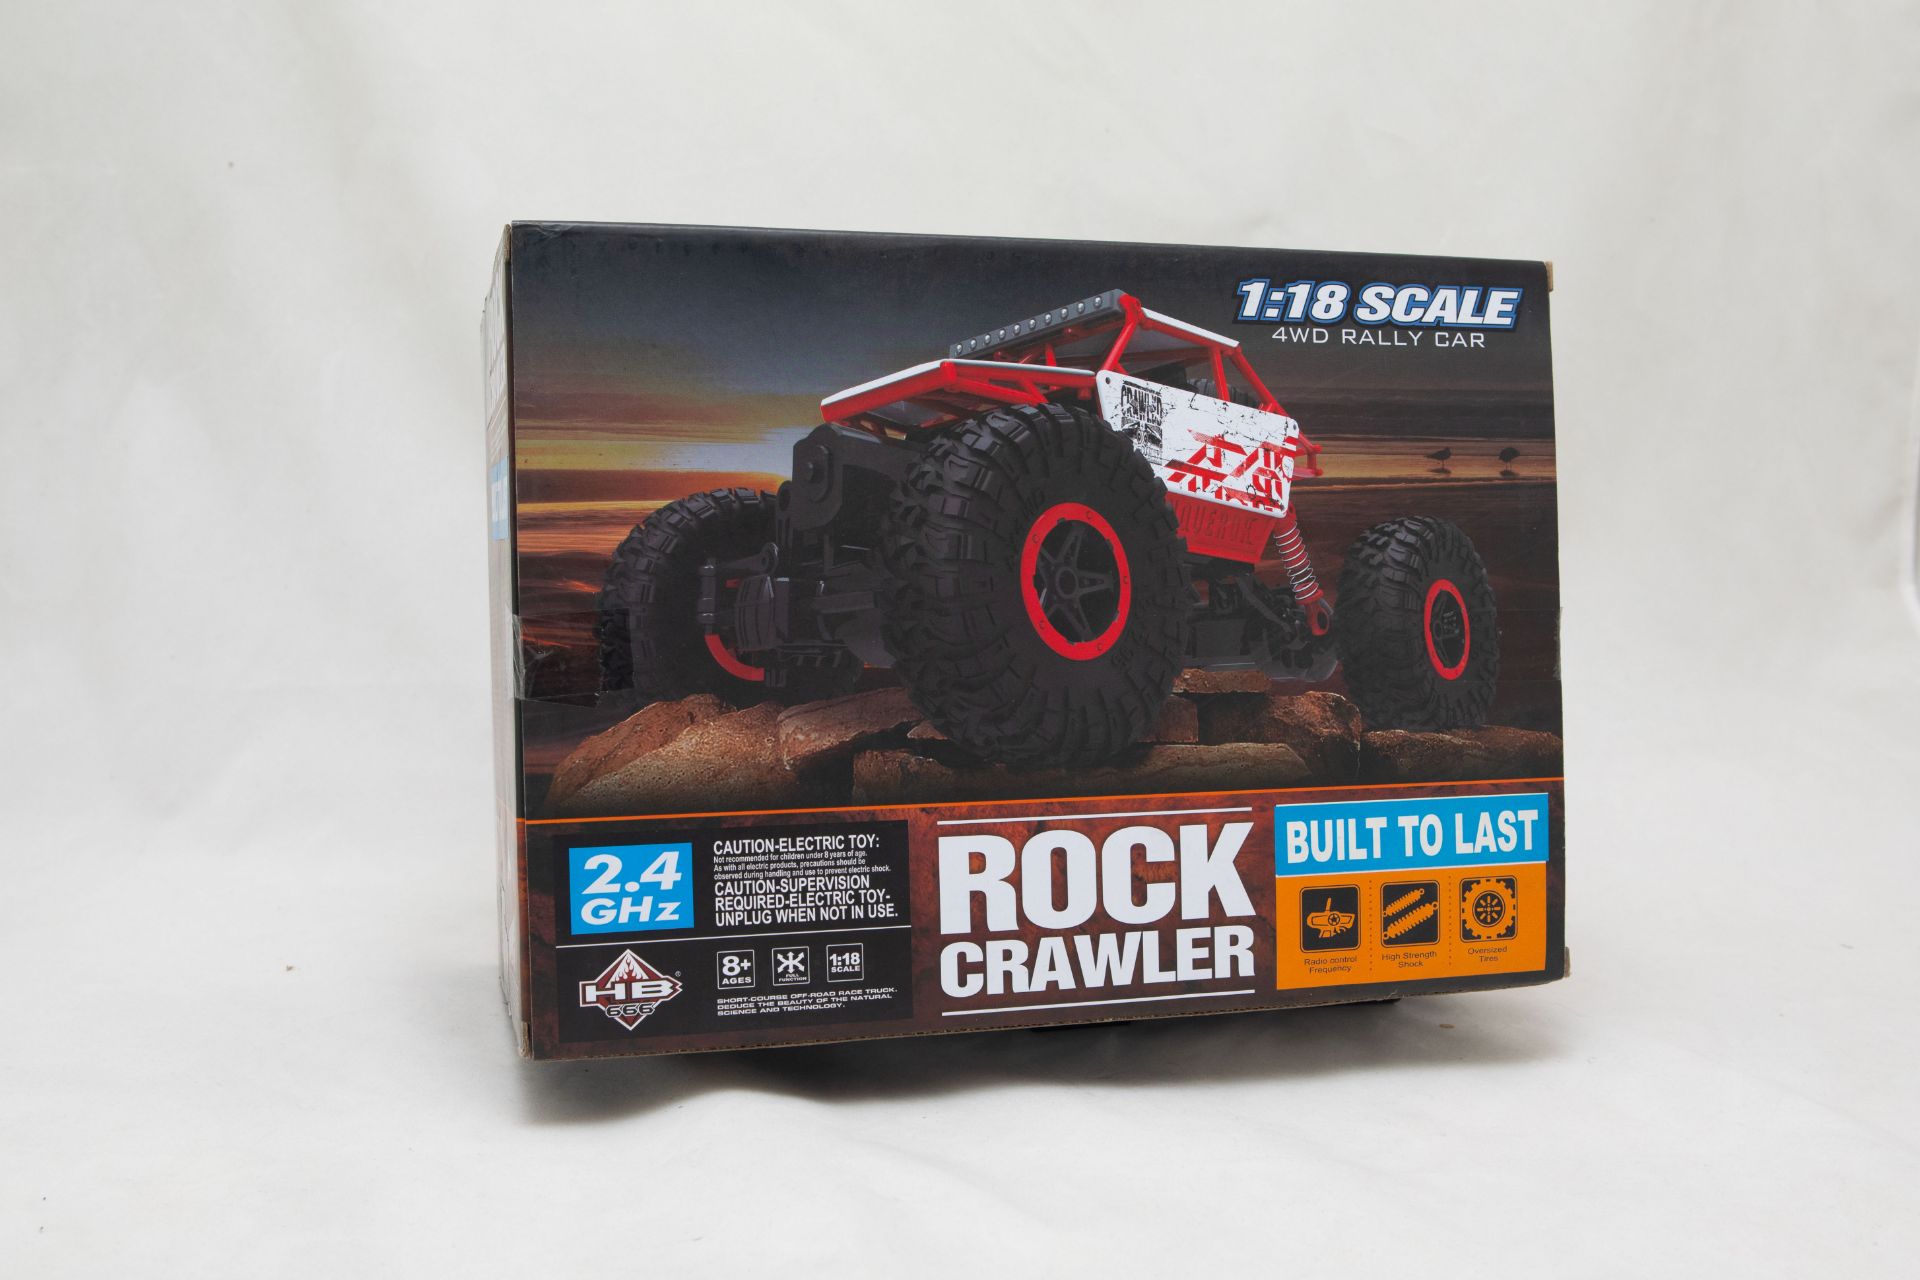 36 X ROCK CRAWLER - REMOTE CONTROL OFF ROAD TRUCK - Image 2 of 9